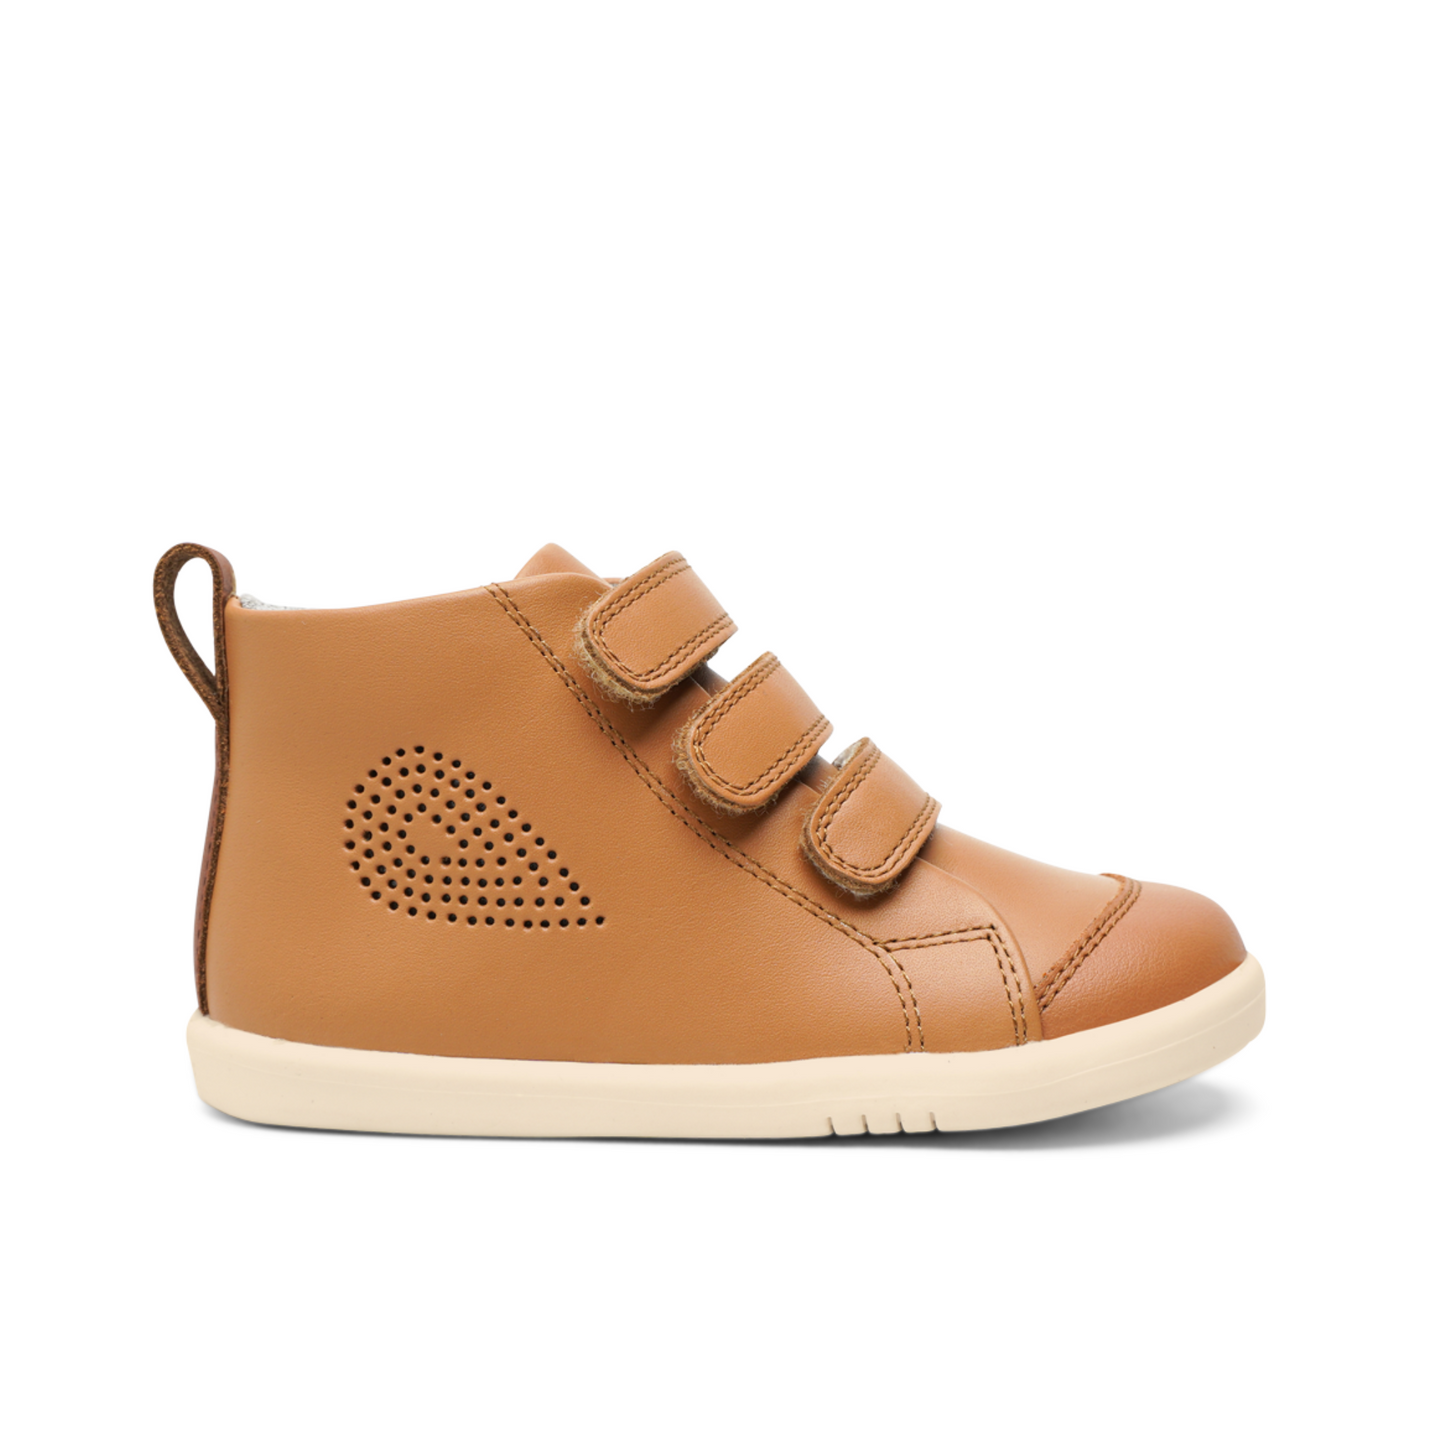 Hi Court in Caramel Leather IW